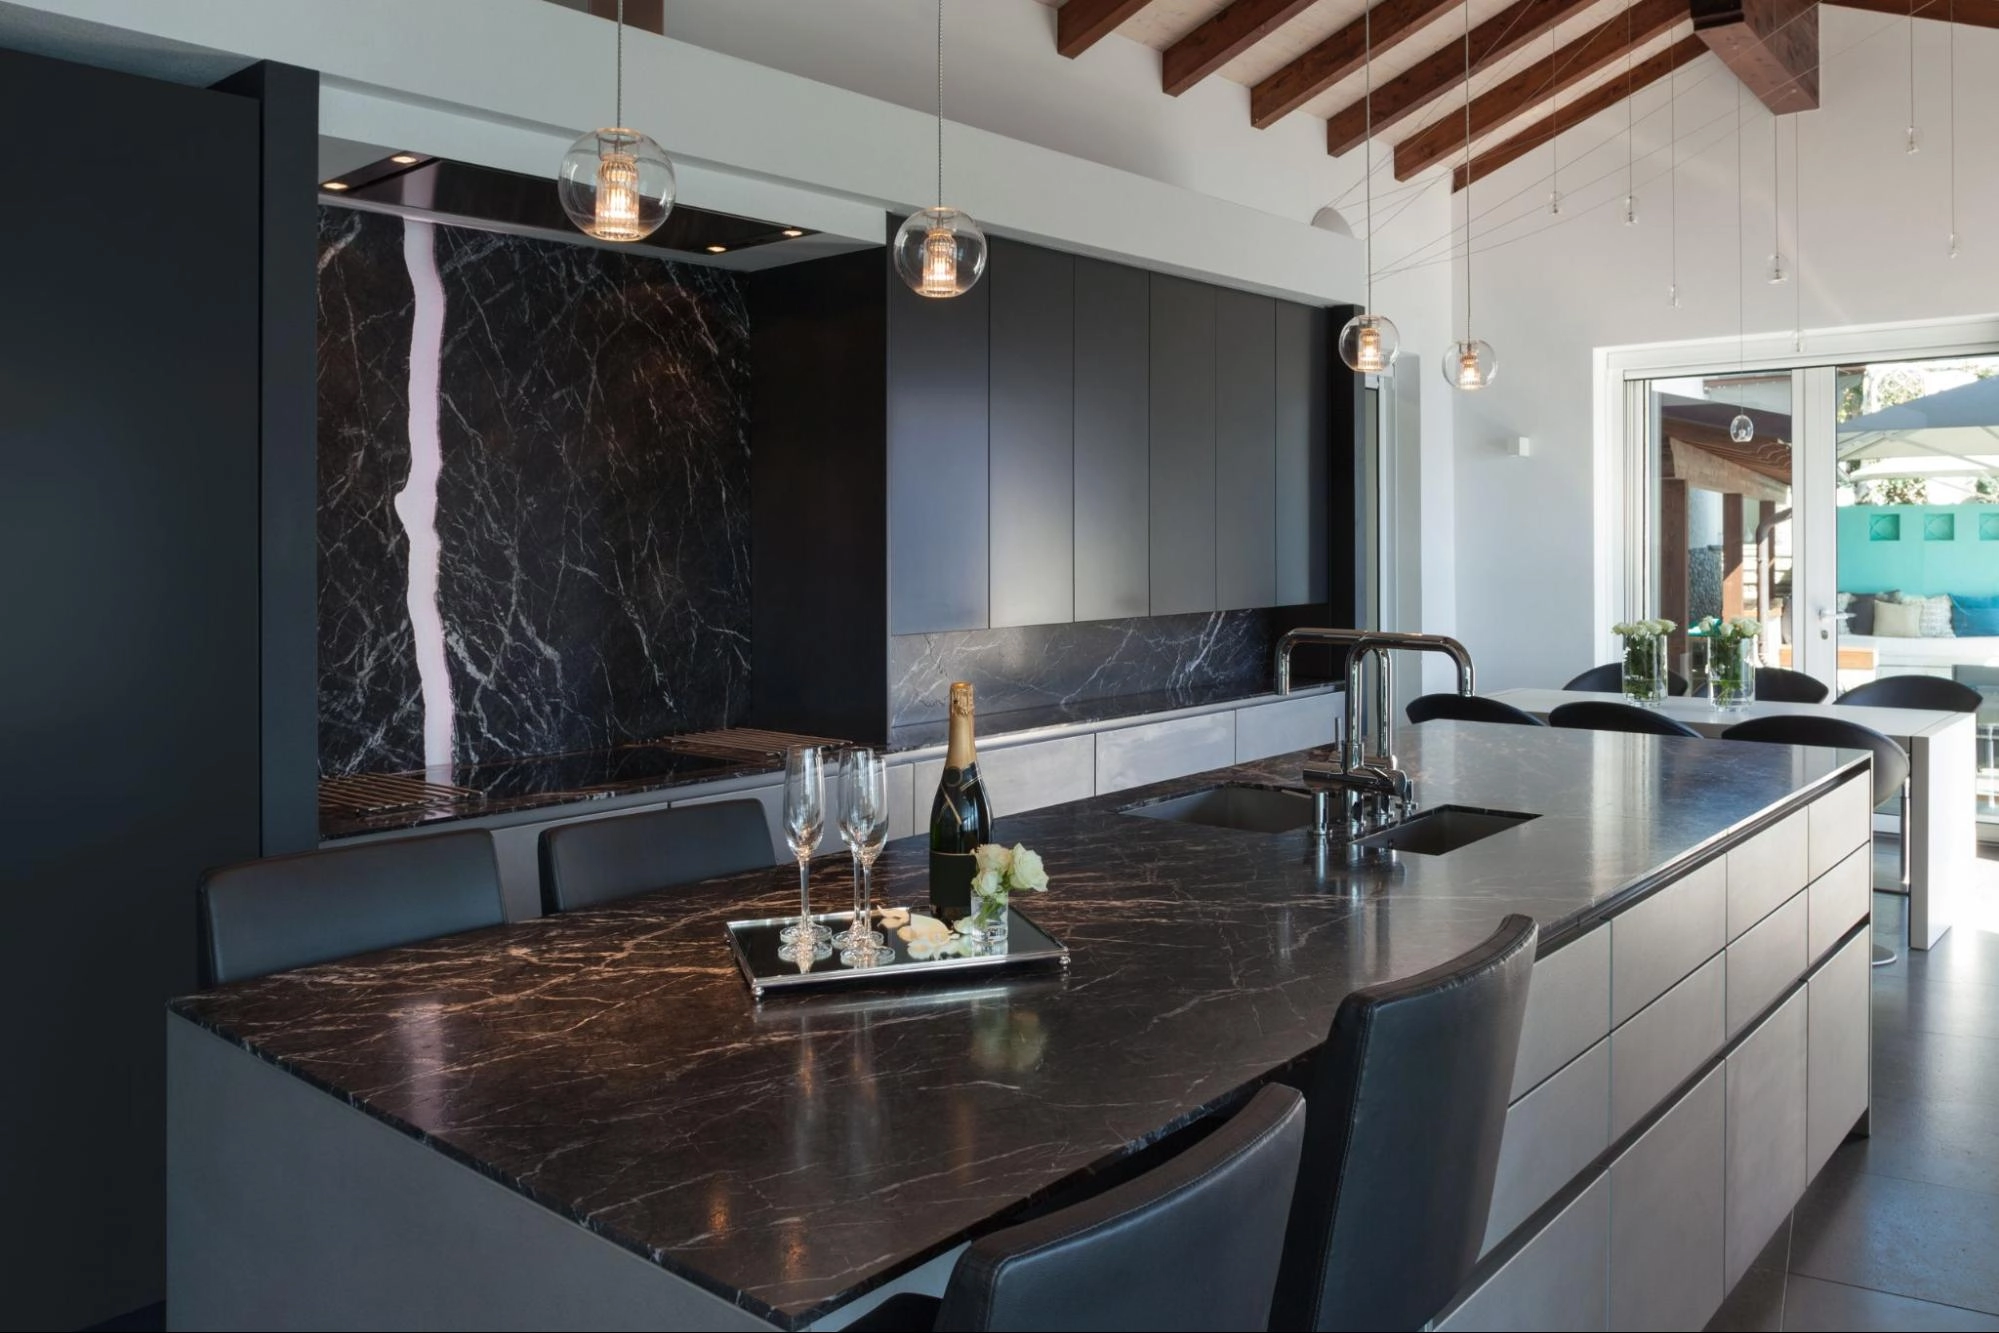 Page(/post/7-Swoon-Worthy-Black-Marble-Kitchen-Ideas.md)